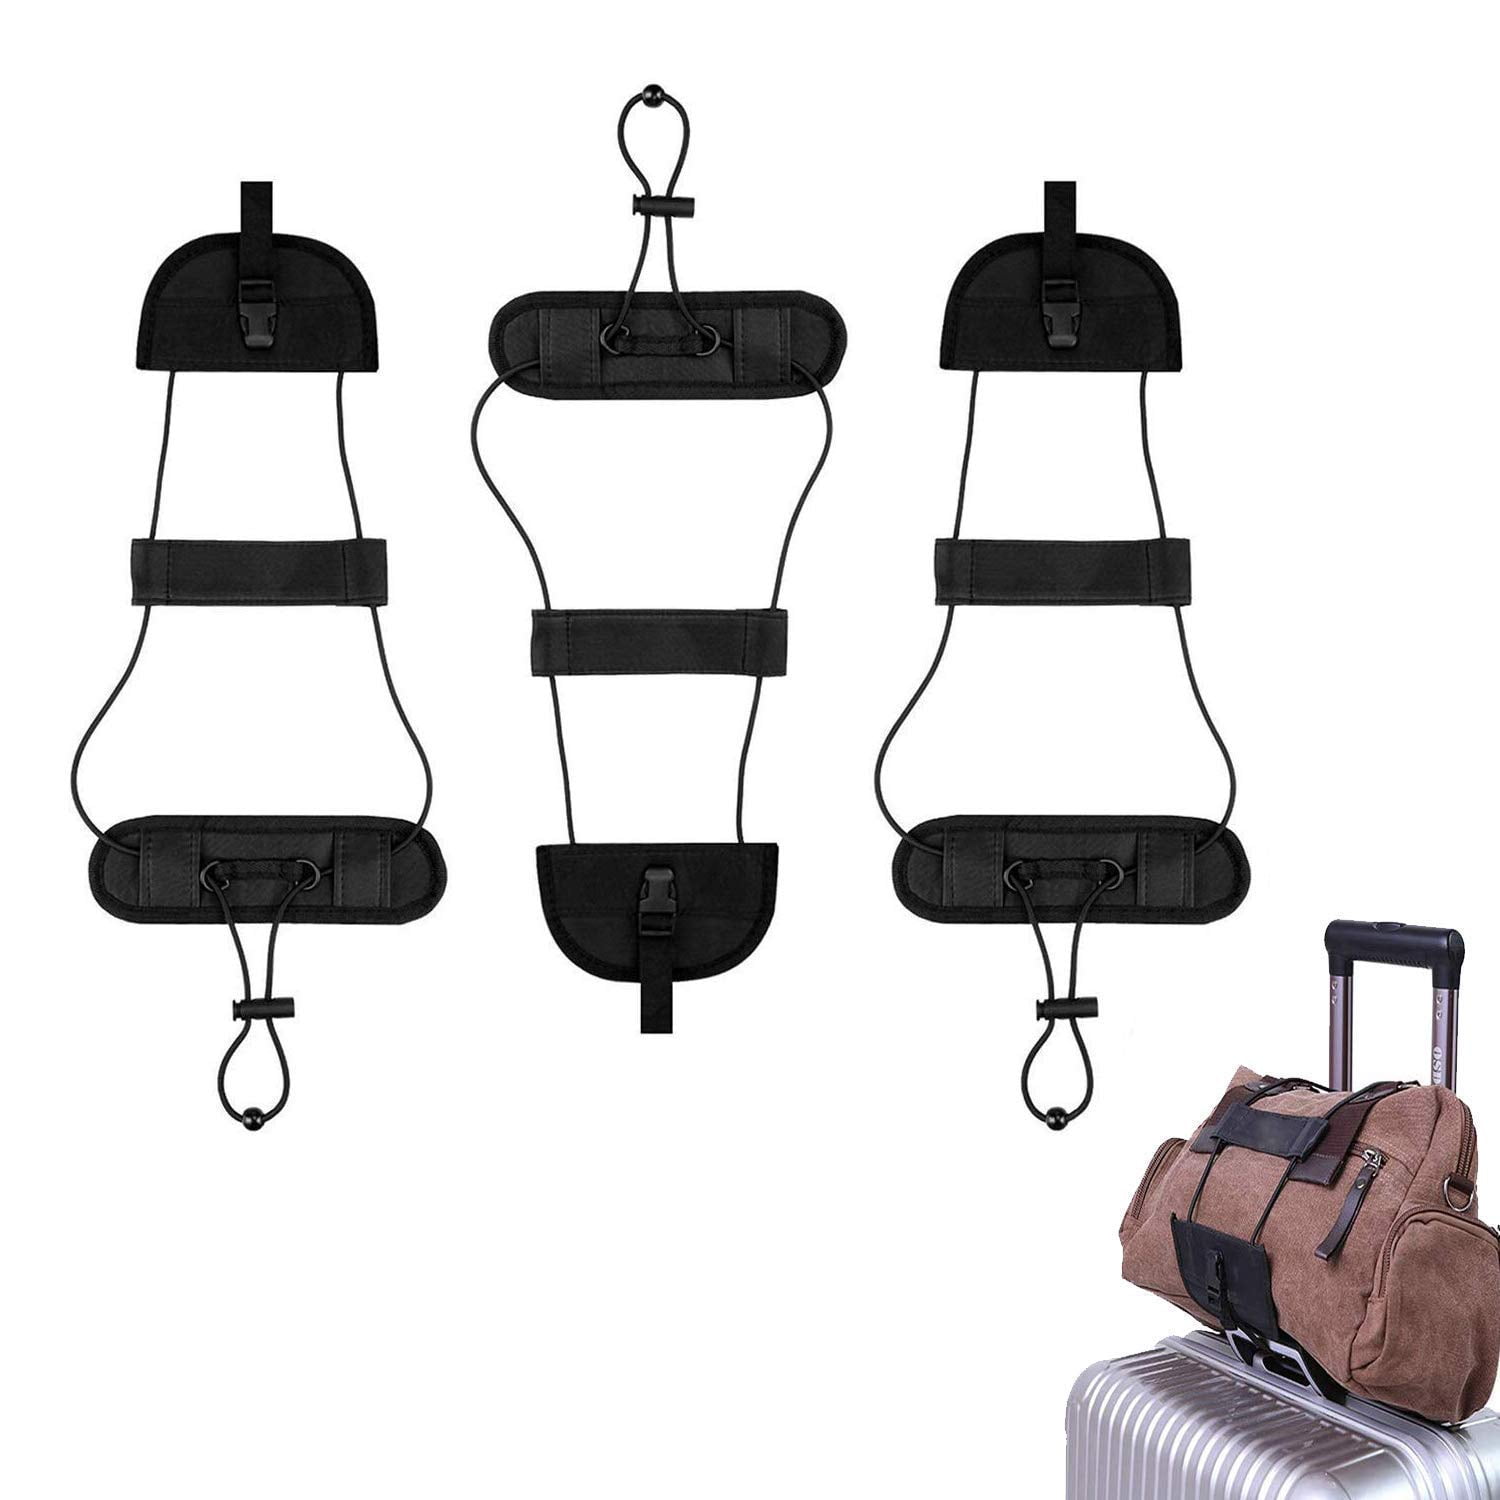 Luggage Bungee Straps 2 Pack with Buckles Elastic Adjustable Sturdy Belt for Roller Case Suitcase Bag Blanket Travelling